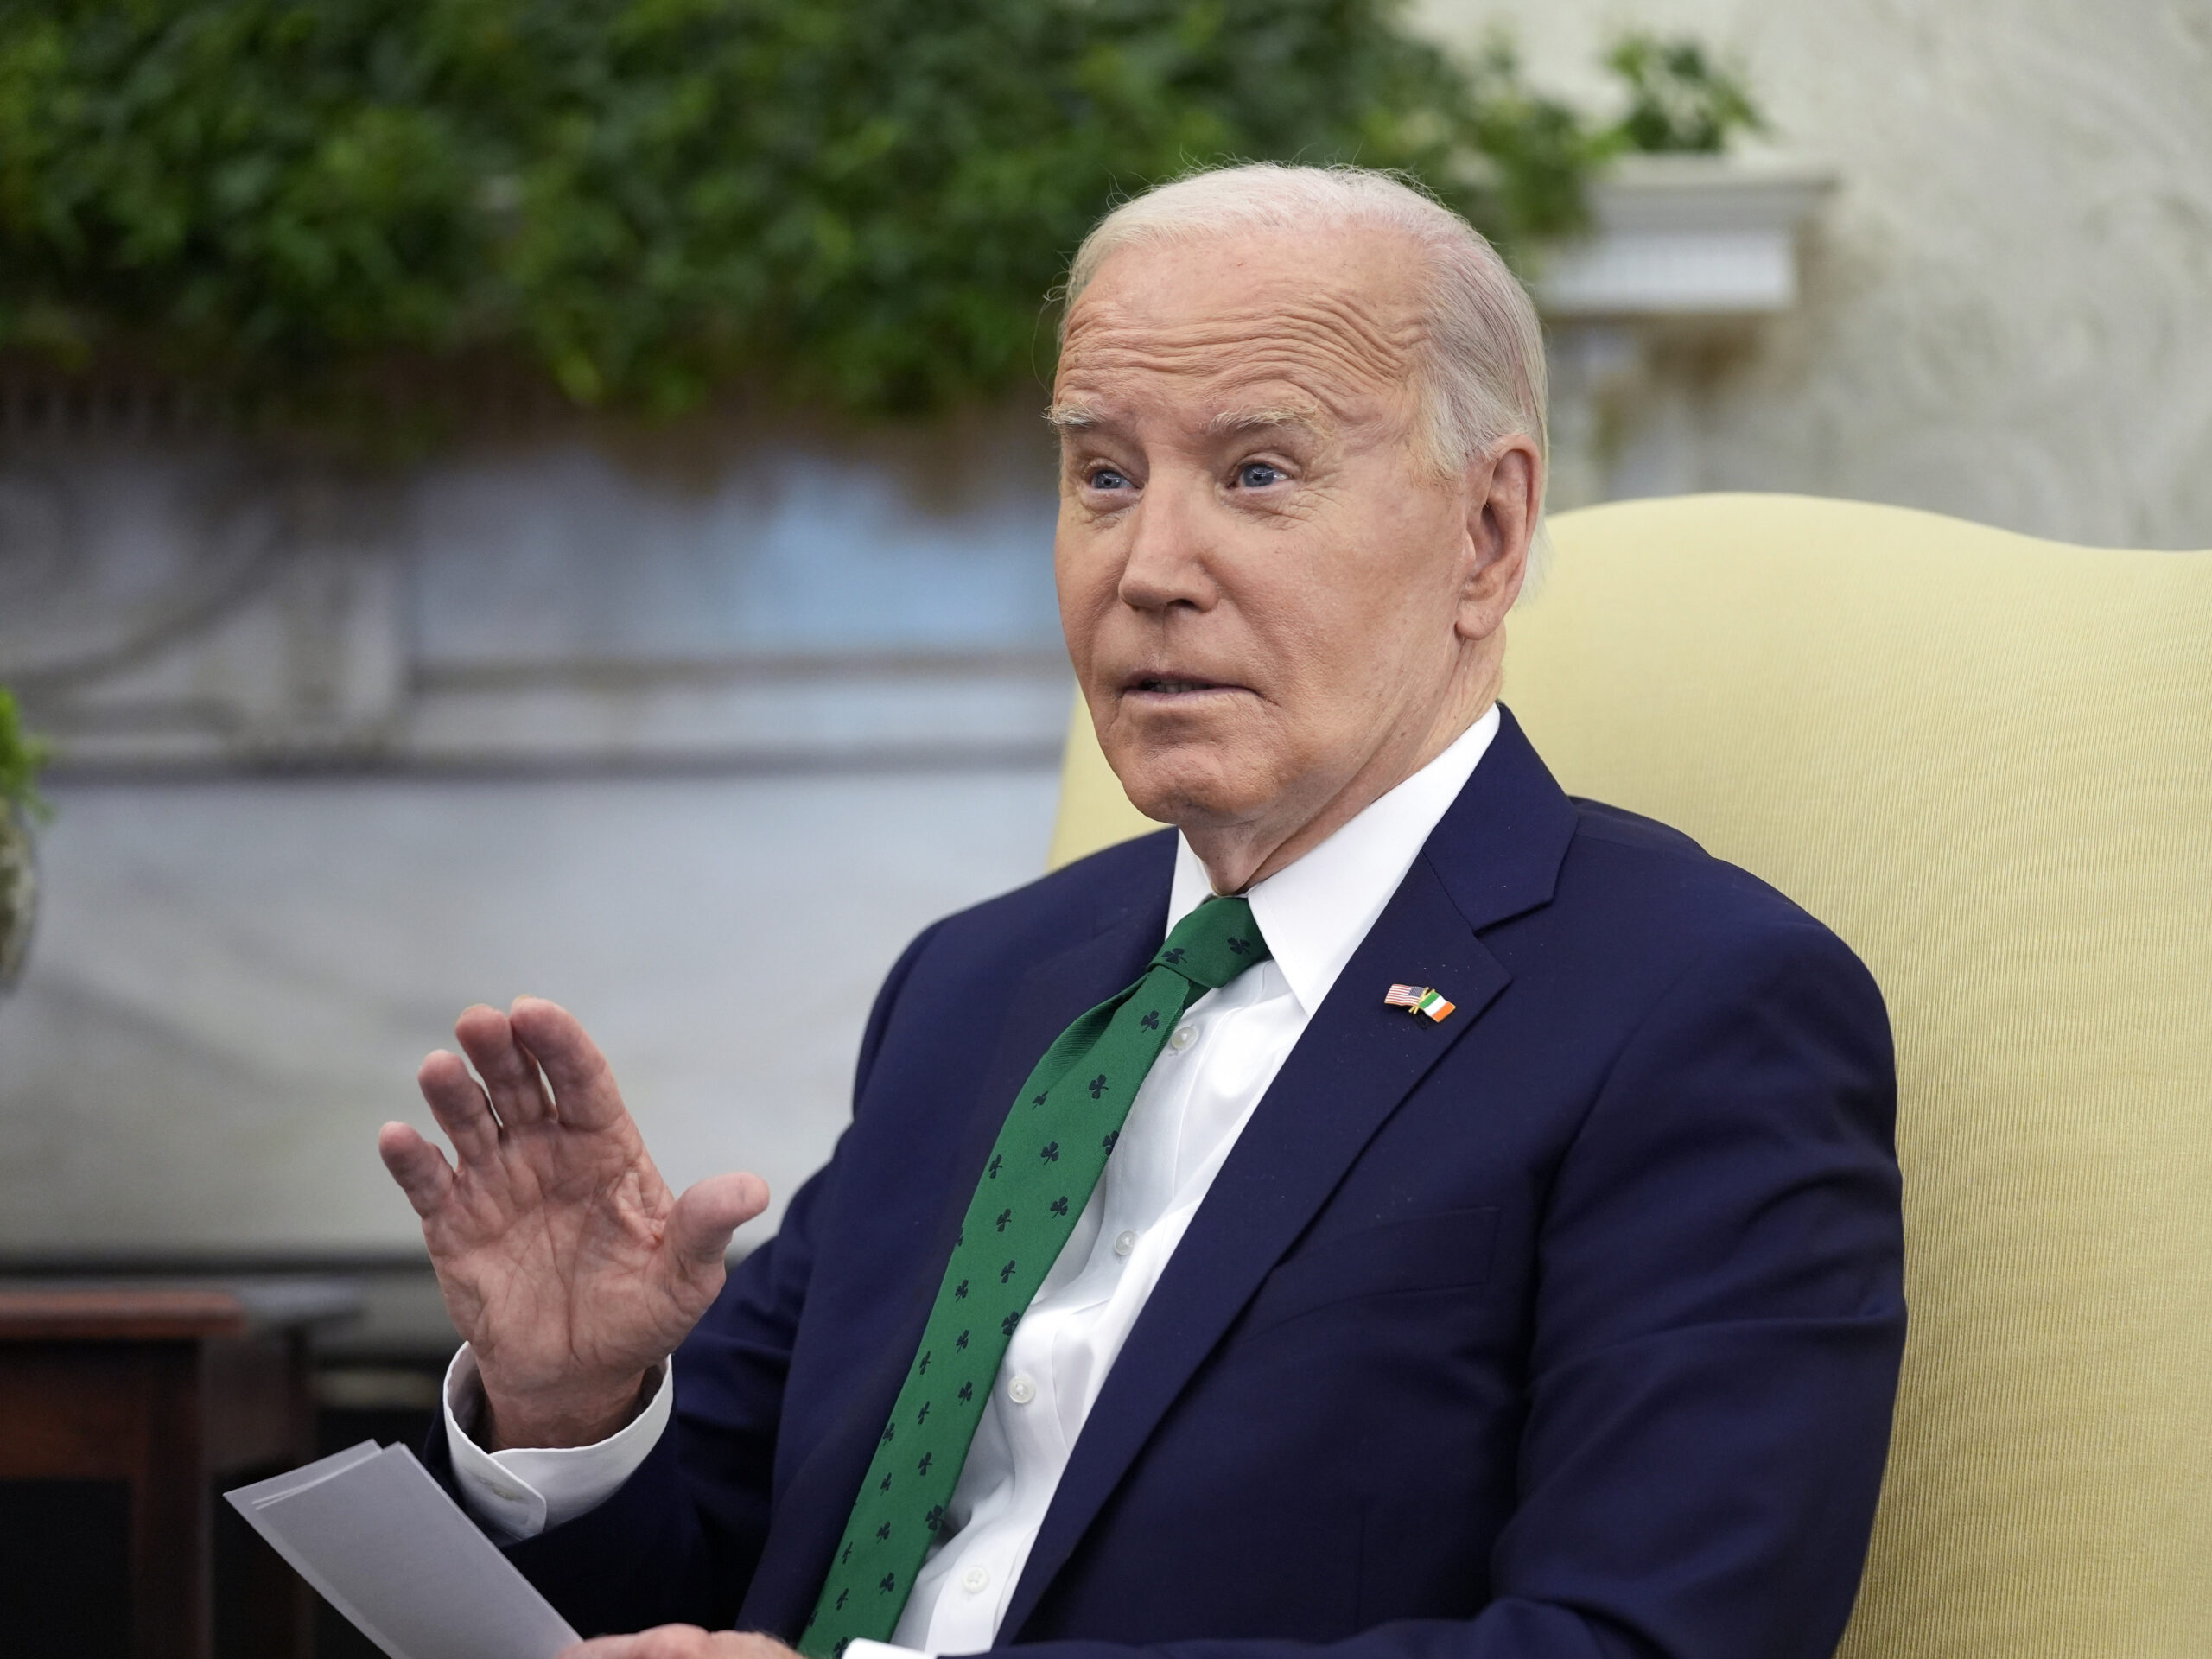 Biden jokes that one presidential candidate is mentally unfit — and it’s not him